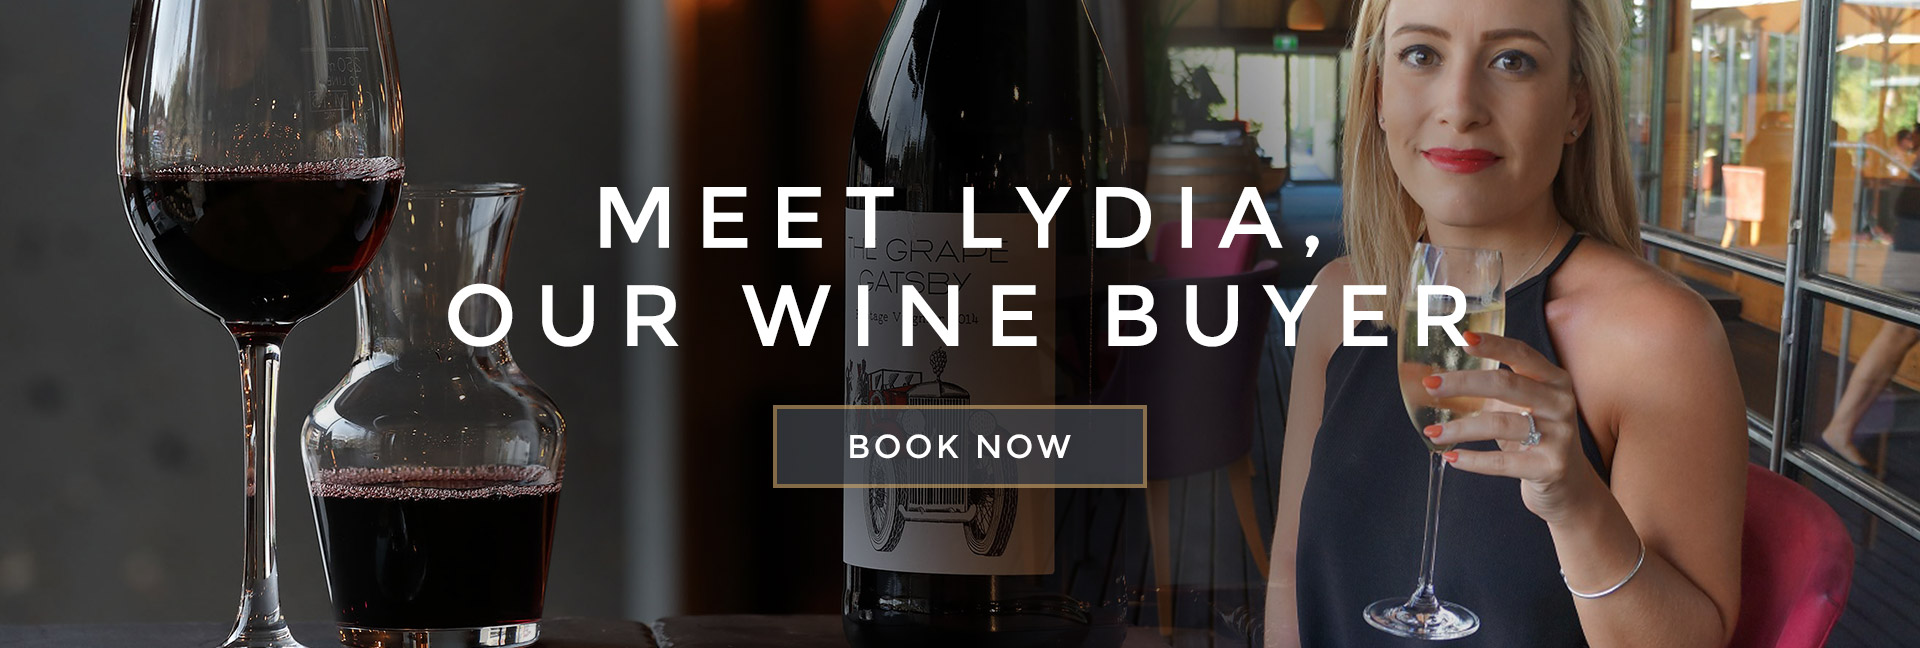 Meet Lydia, our wine buyer at All Bar One Charing Cross